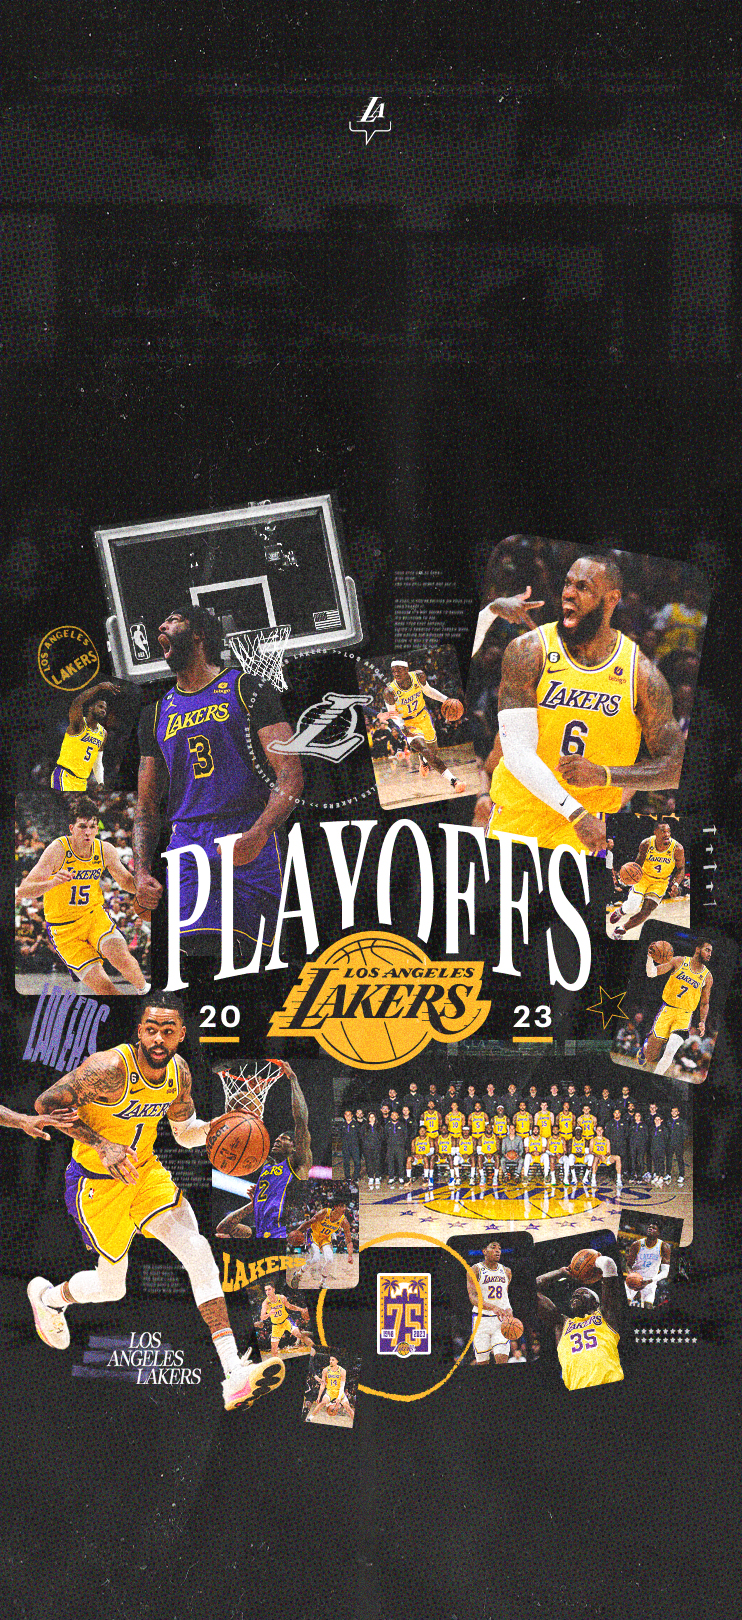 Lakers Championship Wallpapers - Wallpaper Cave